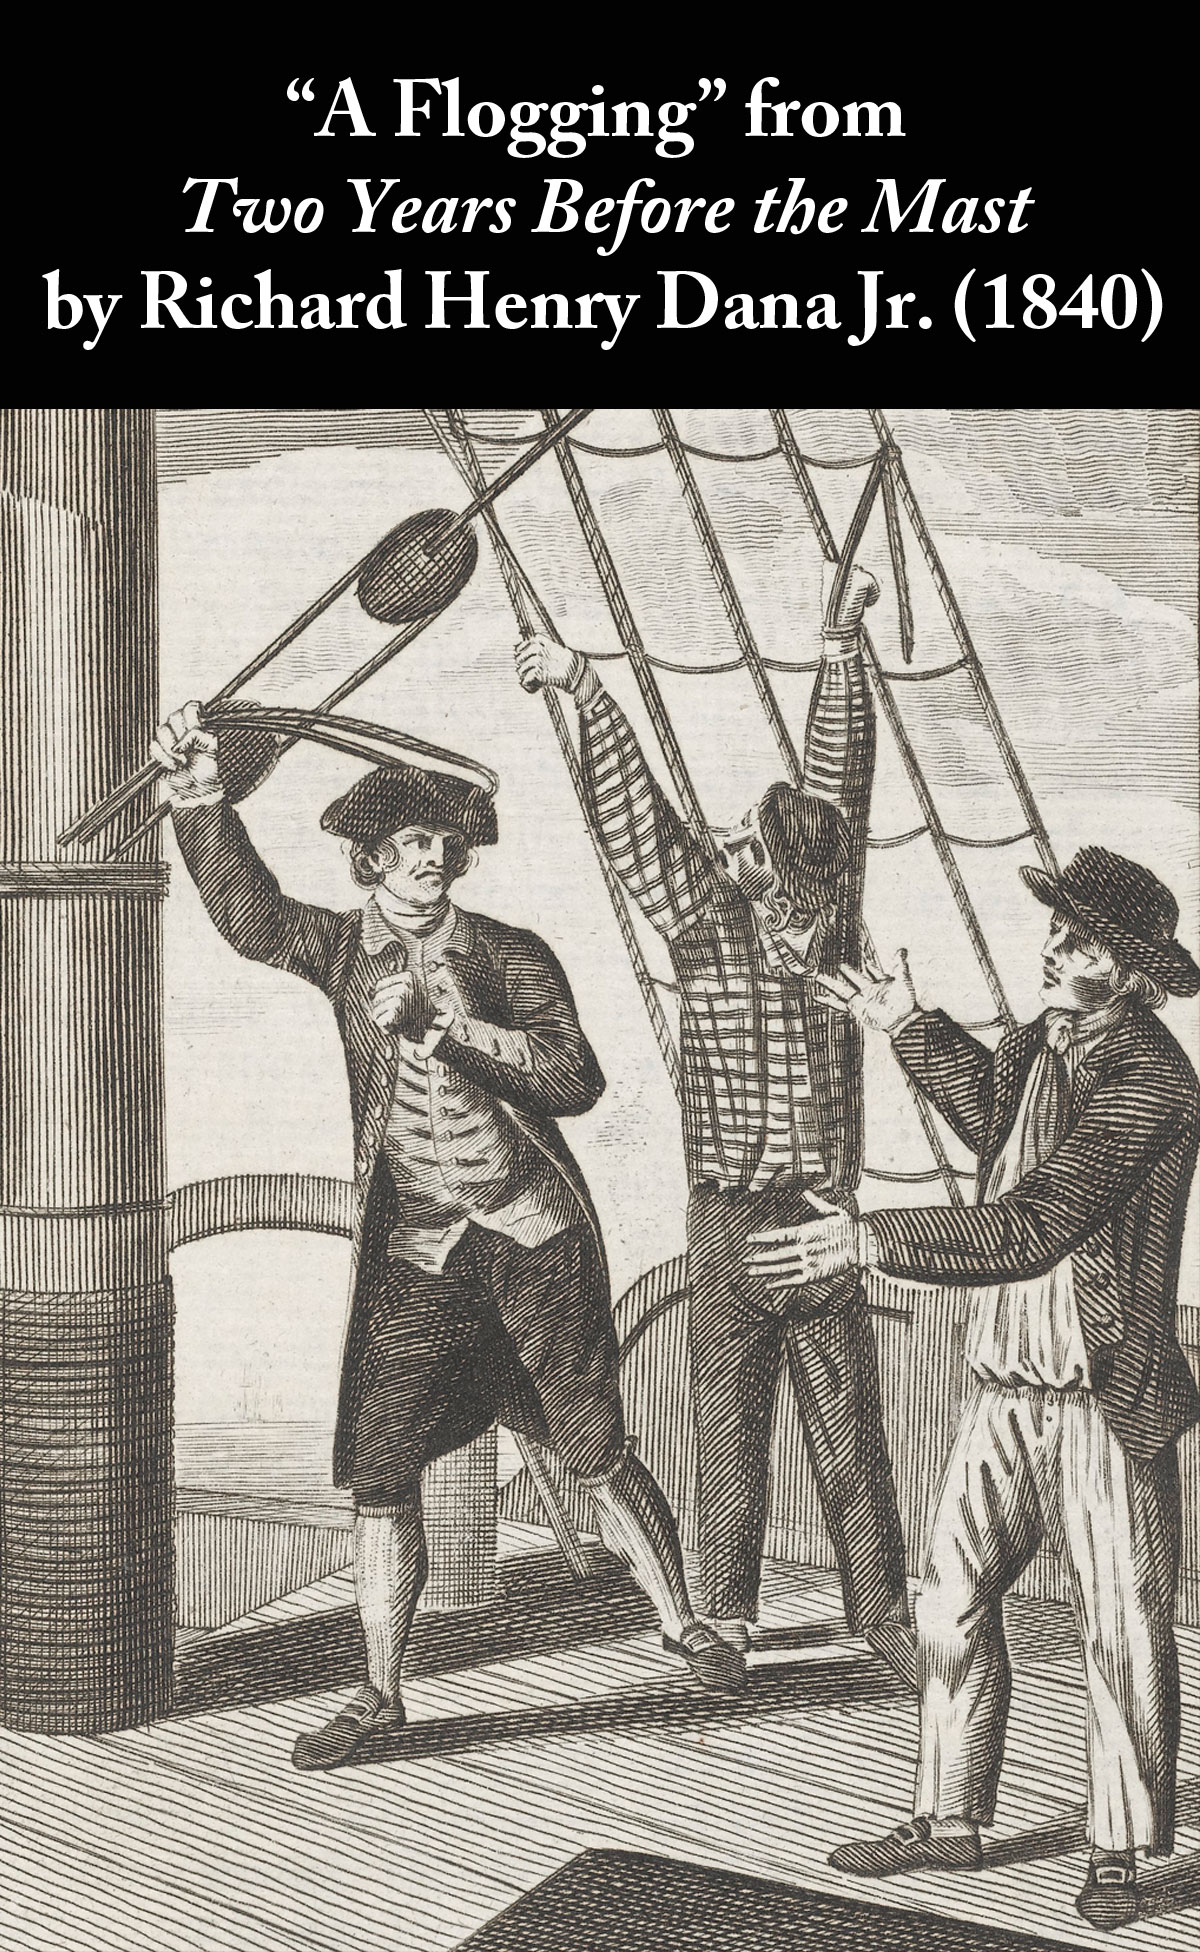 A Flogging from Two Years Before the Mast by Richard Henry Dana Jr. (1840)